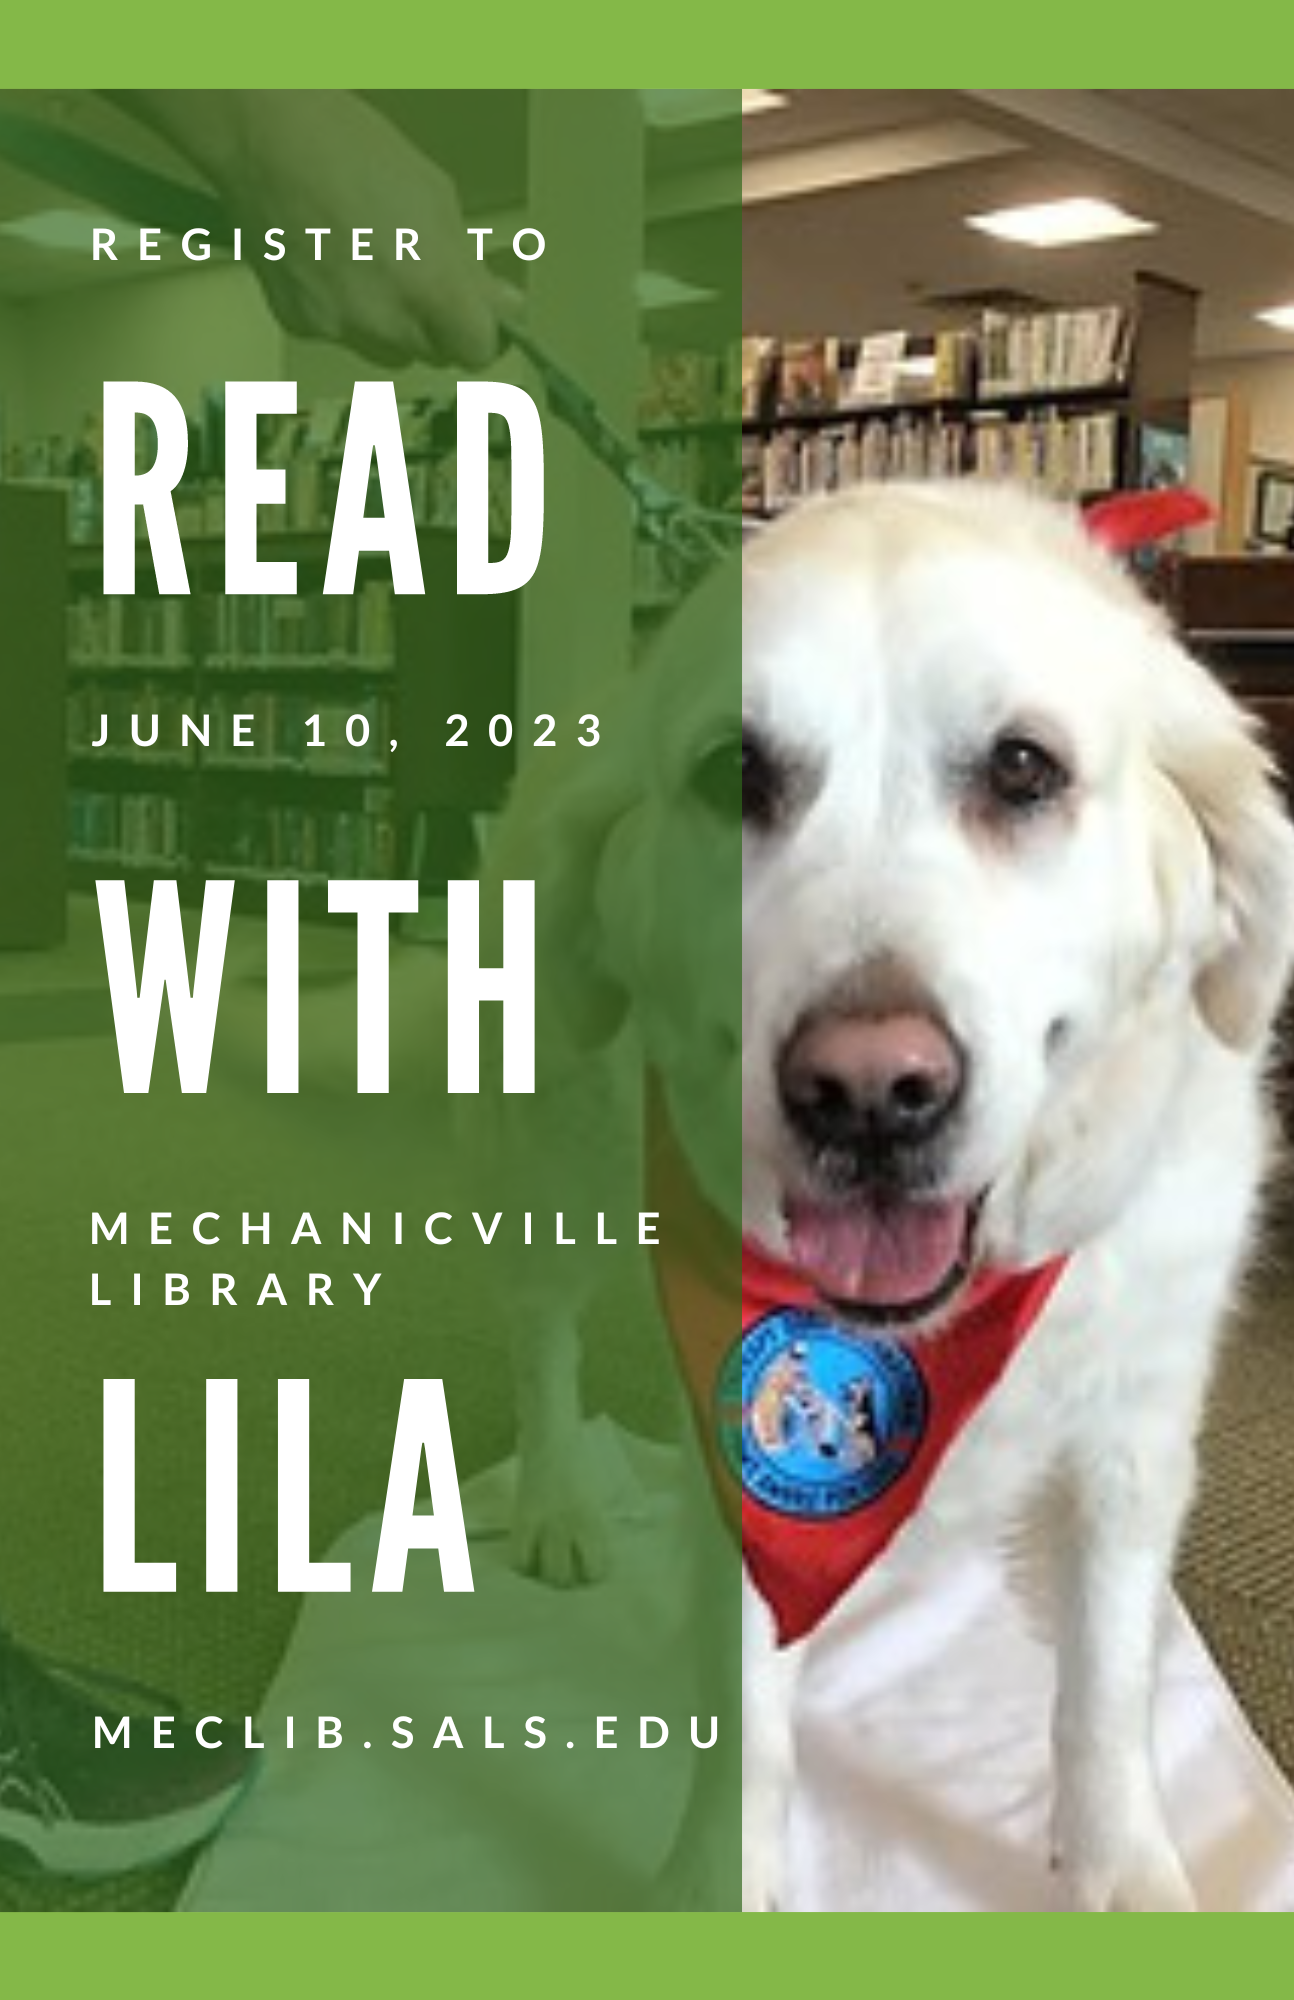 Reading Therapy Dog Sessions with Lila! @ Mechanicville District Public Library | Mechanicville | New York | United States